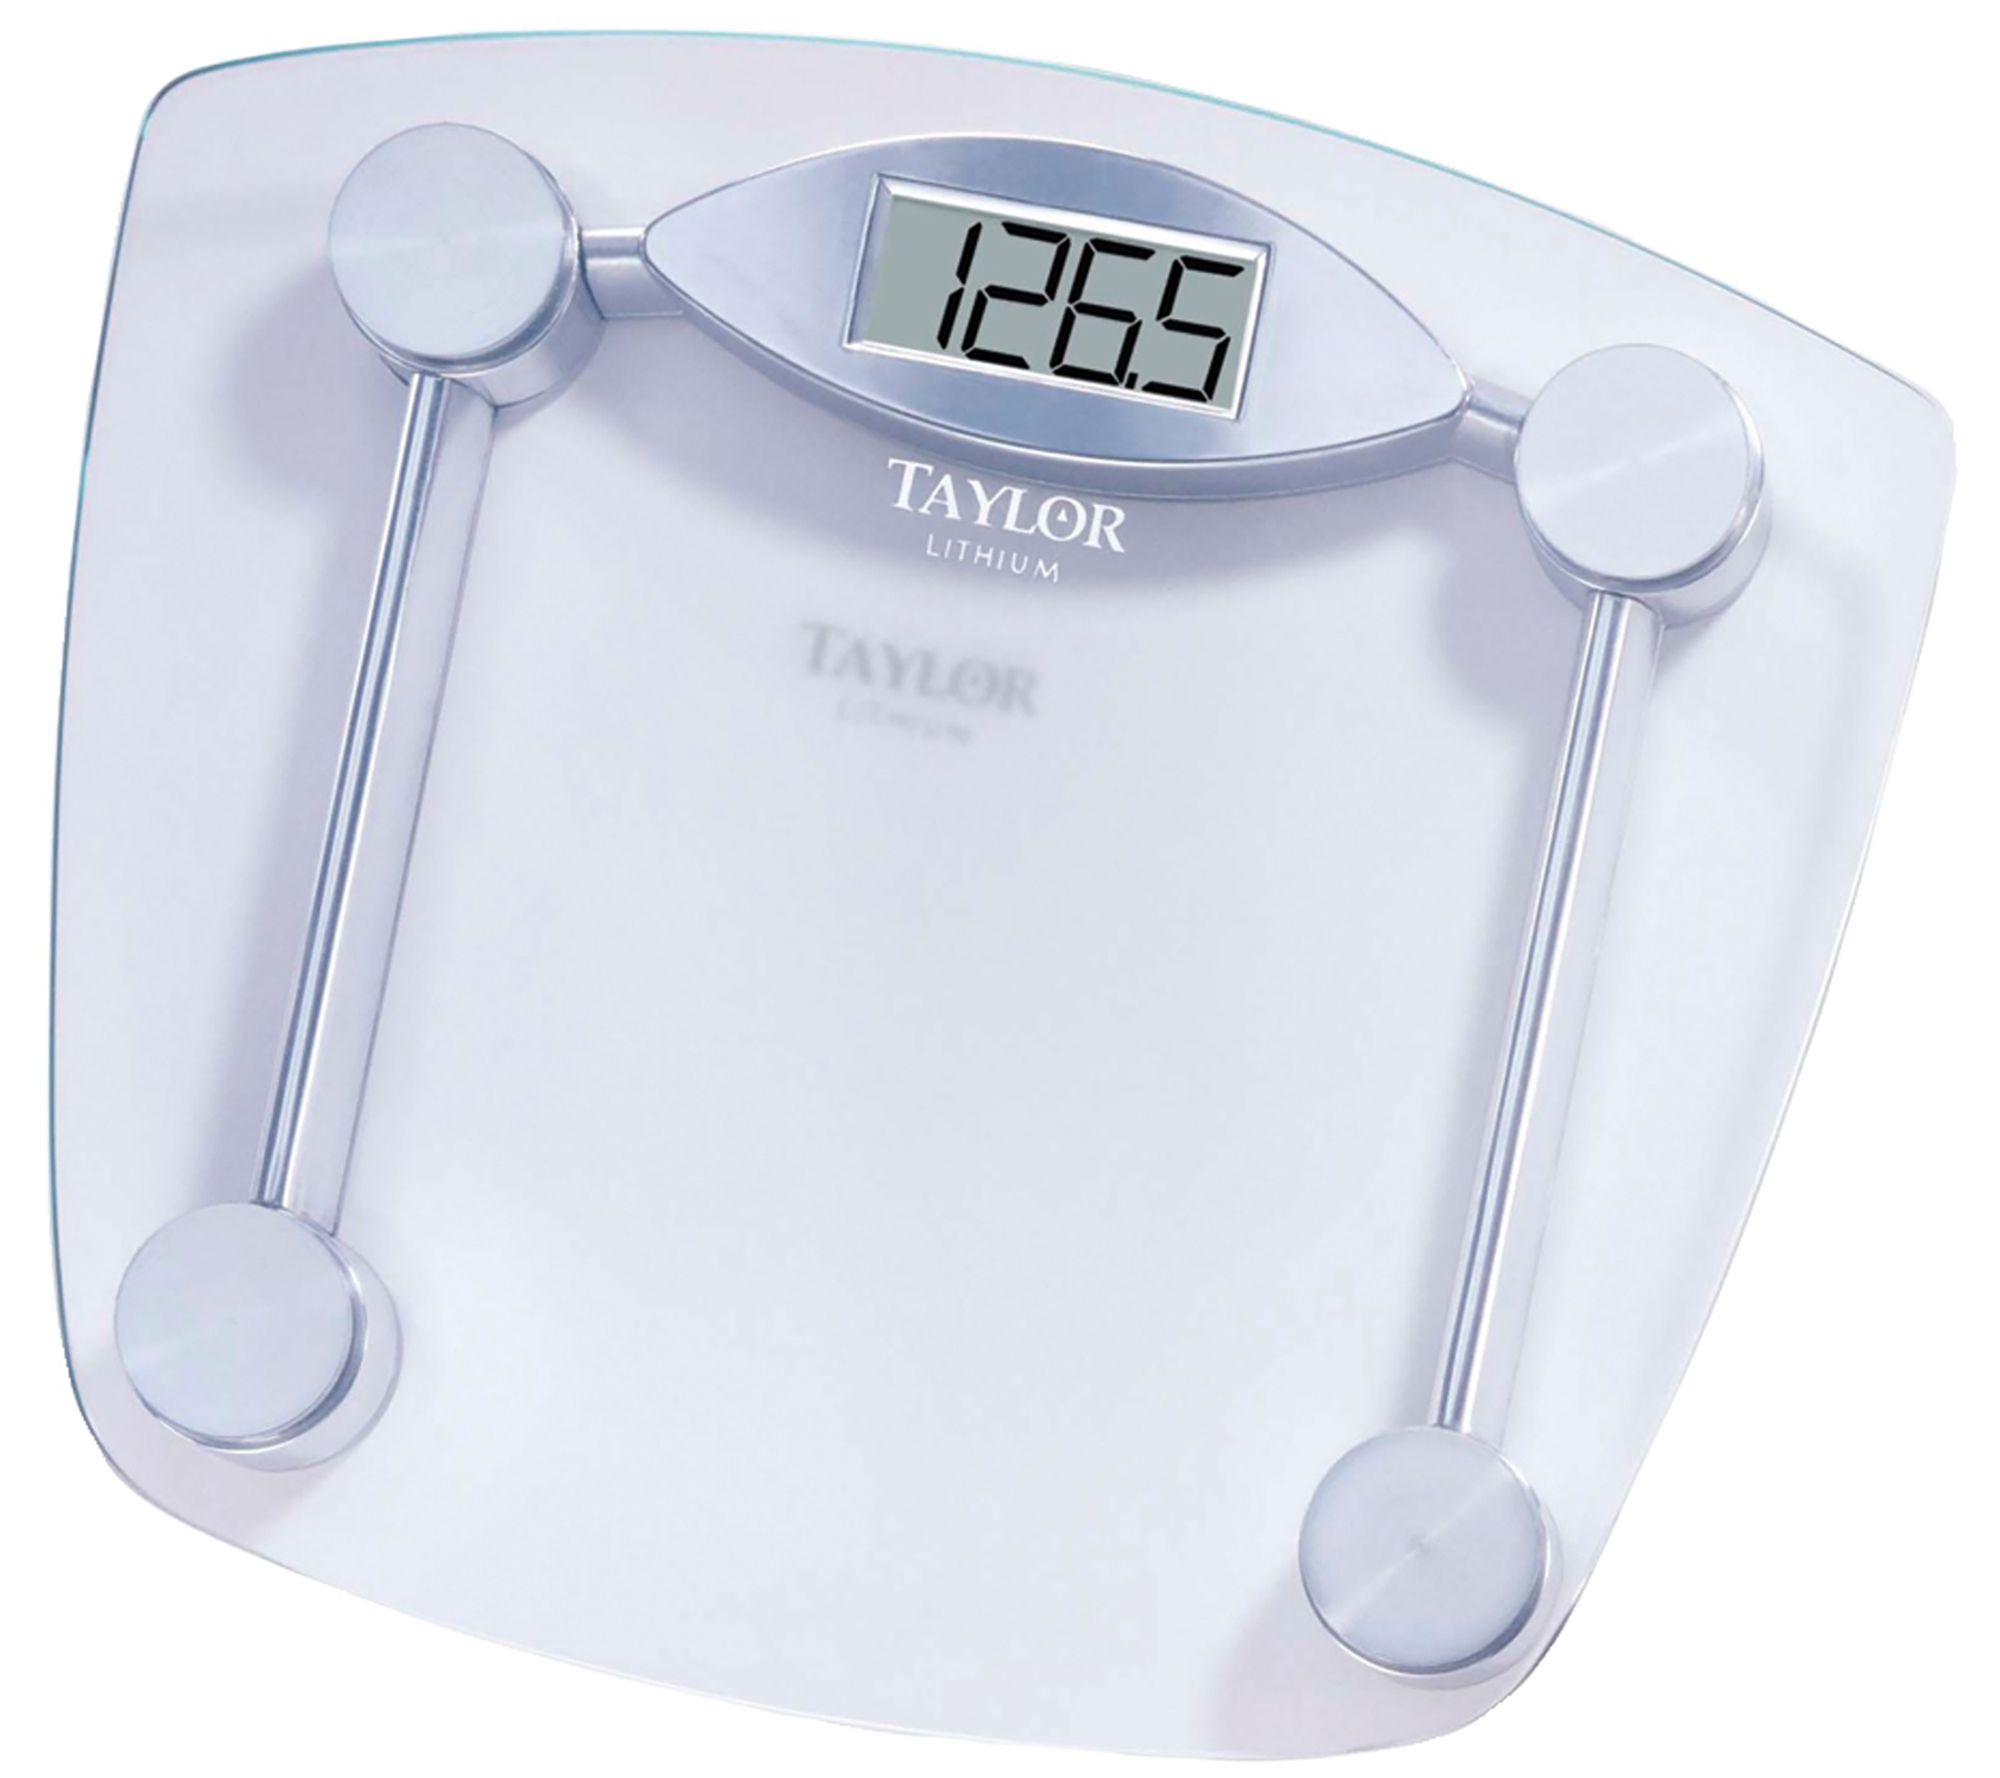 Digital Thin Stainless Steel Bathroom Scale - Taylor